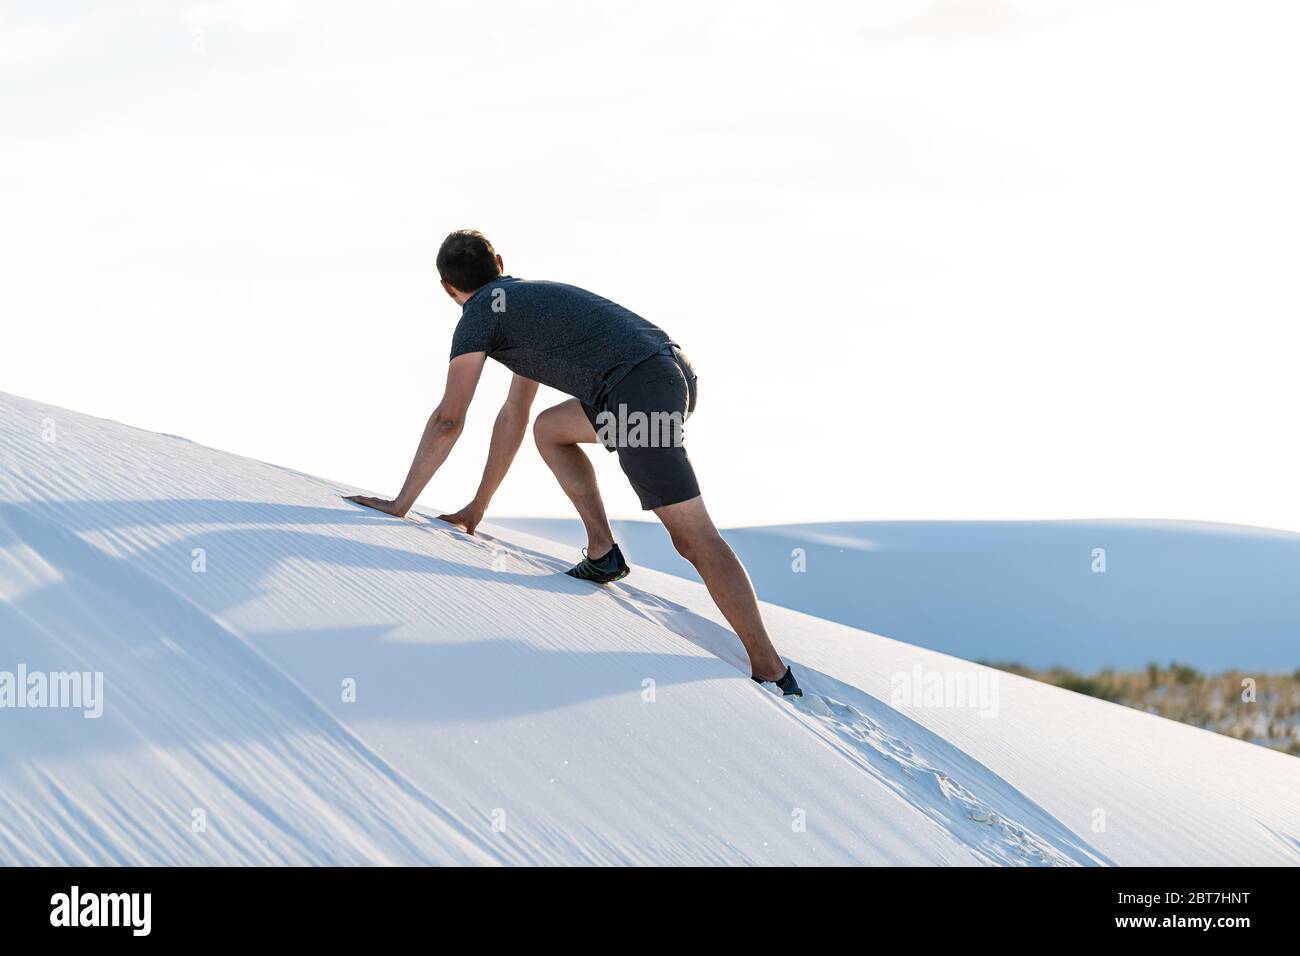 Man one person climbing on all fours on sand hill in white sands dunes national monument in New Mexico at sunset looking at view Stock Photo